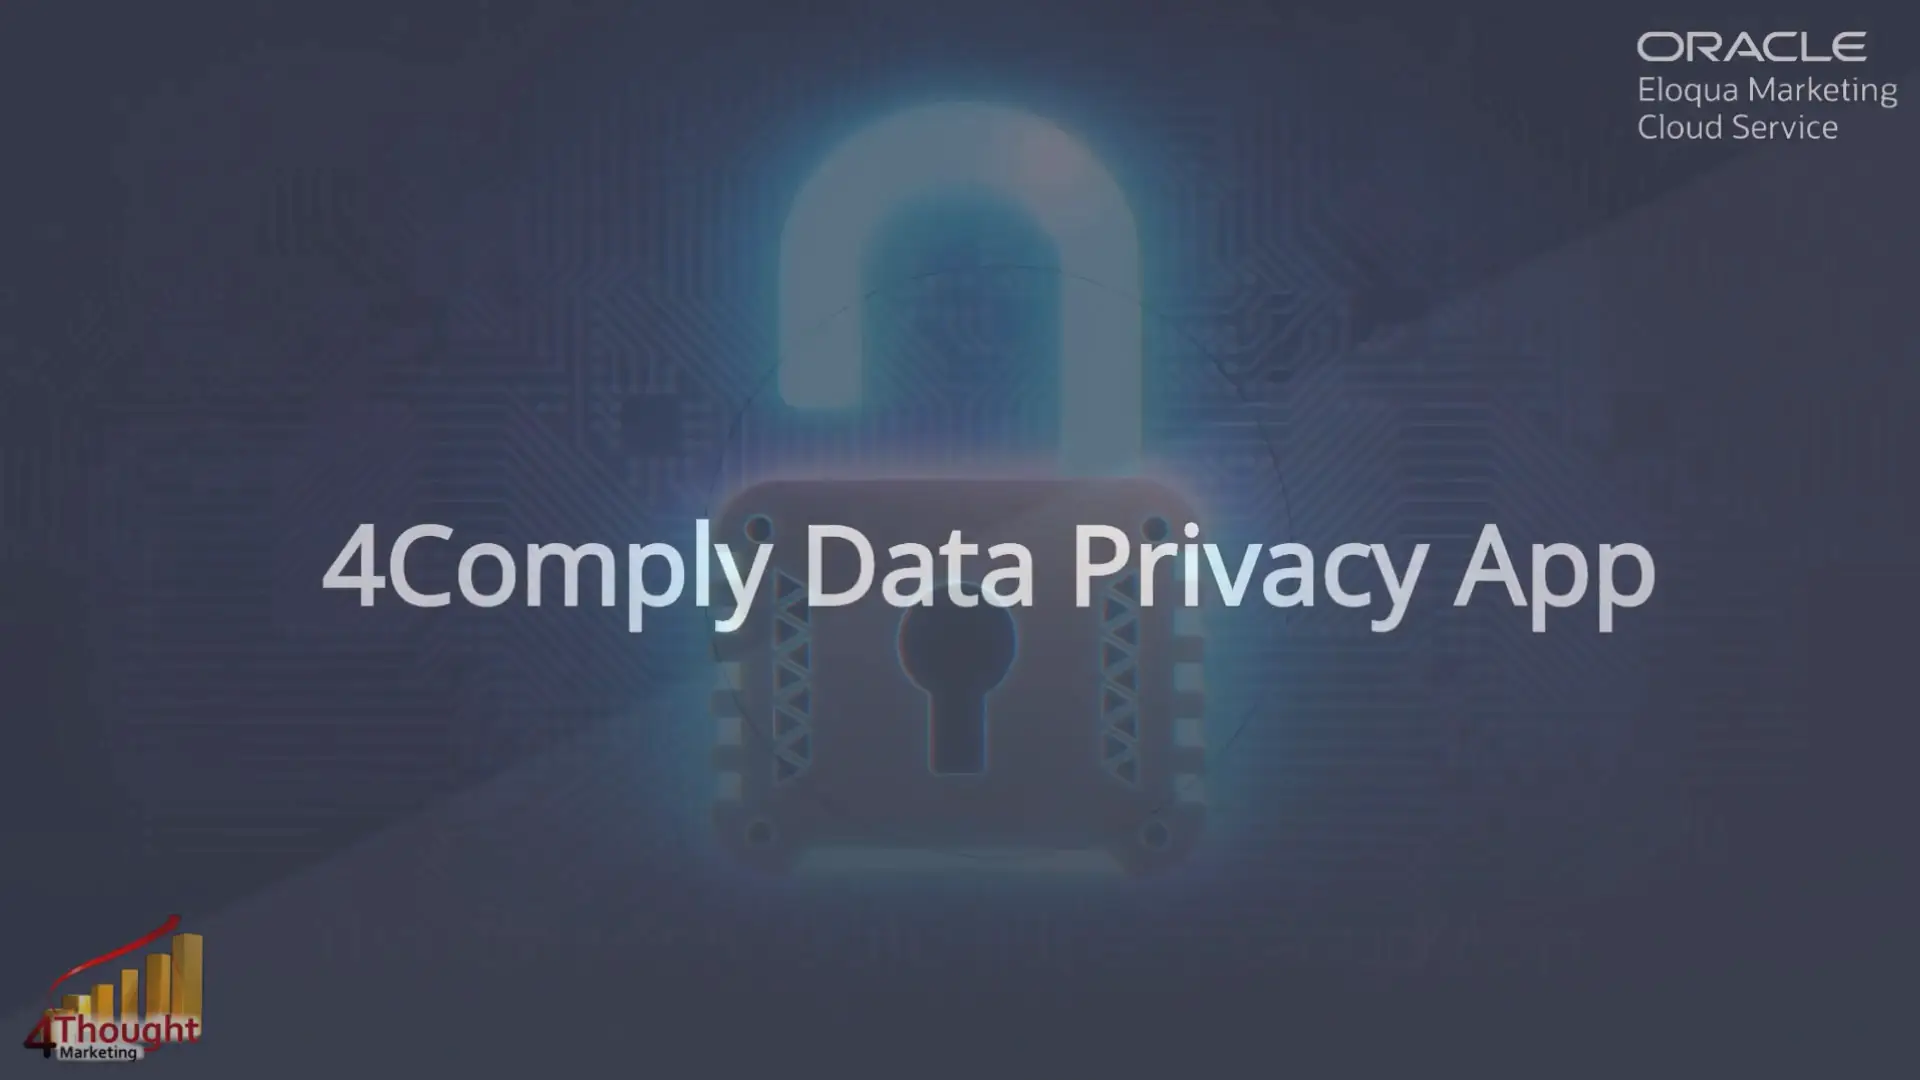 Comply Data Privacy App Long Title Thumbnail